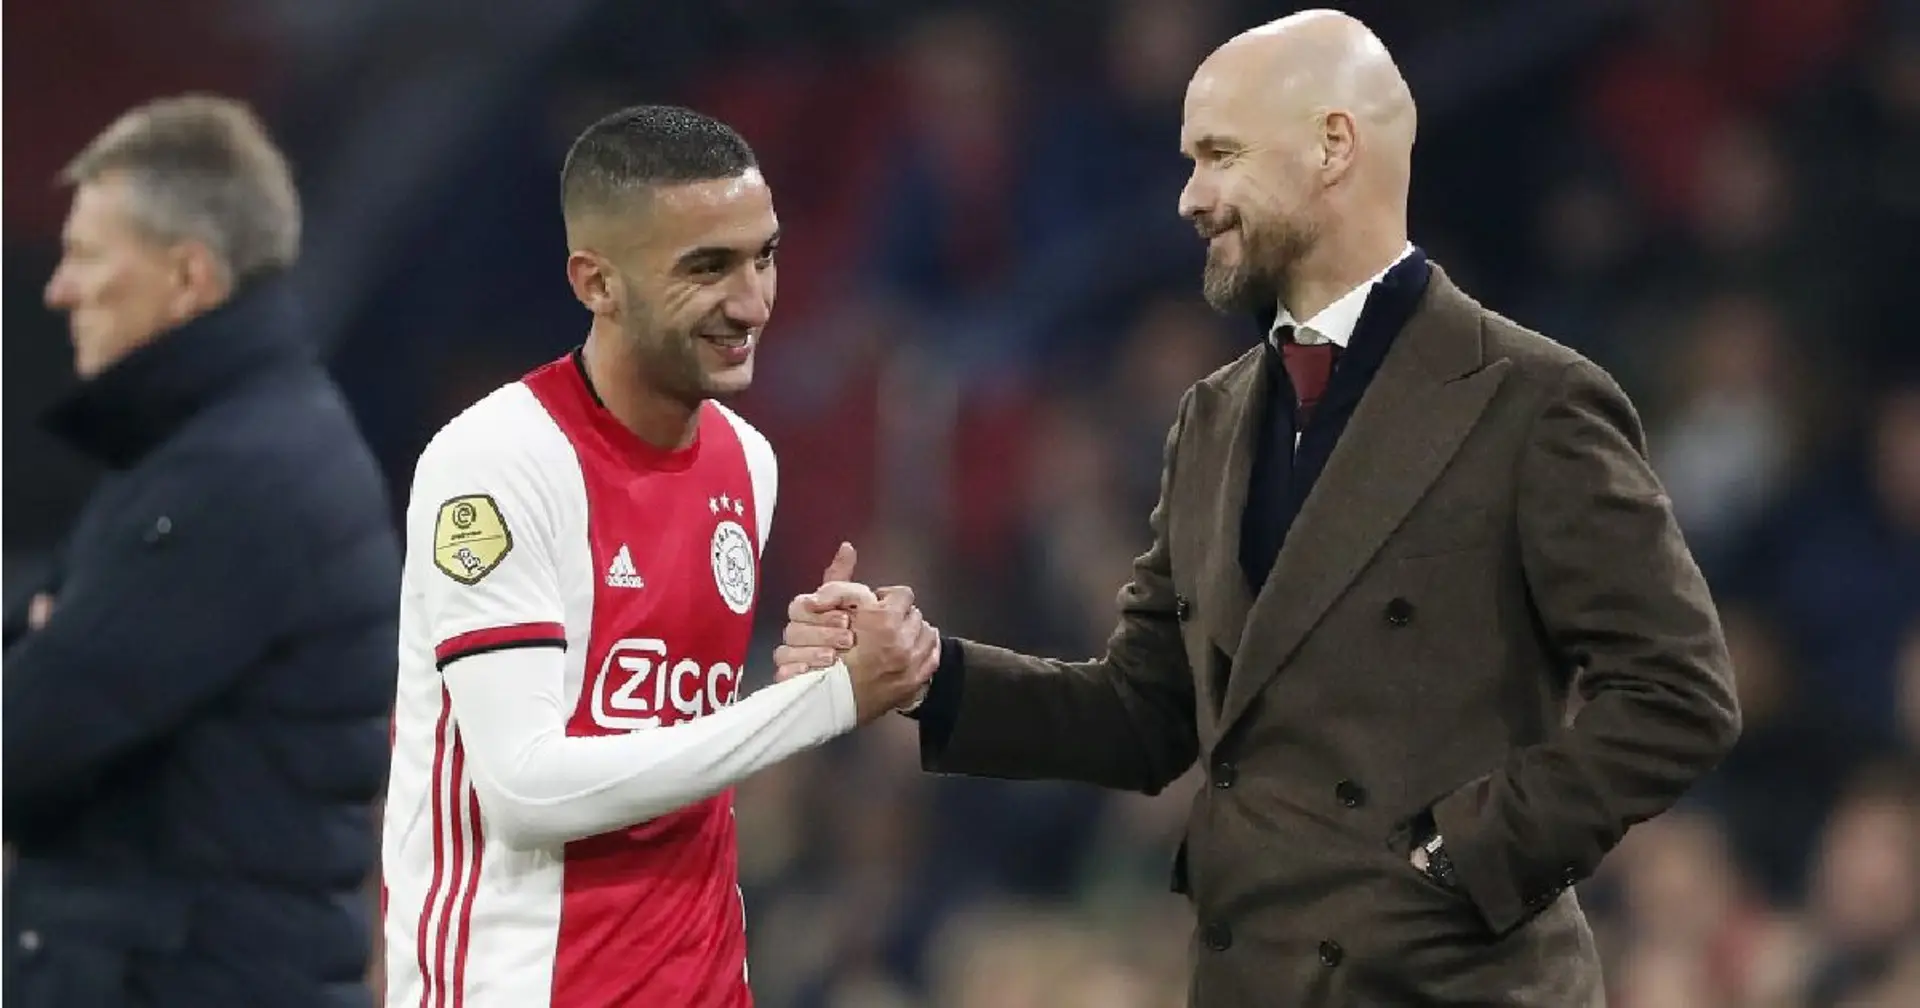 He gave us some attractive football: Ajax coach's short goodbye message to Ziyech